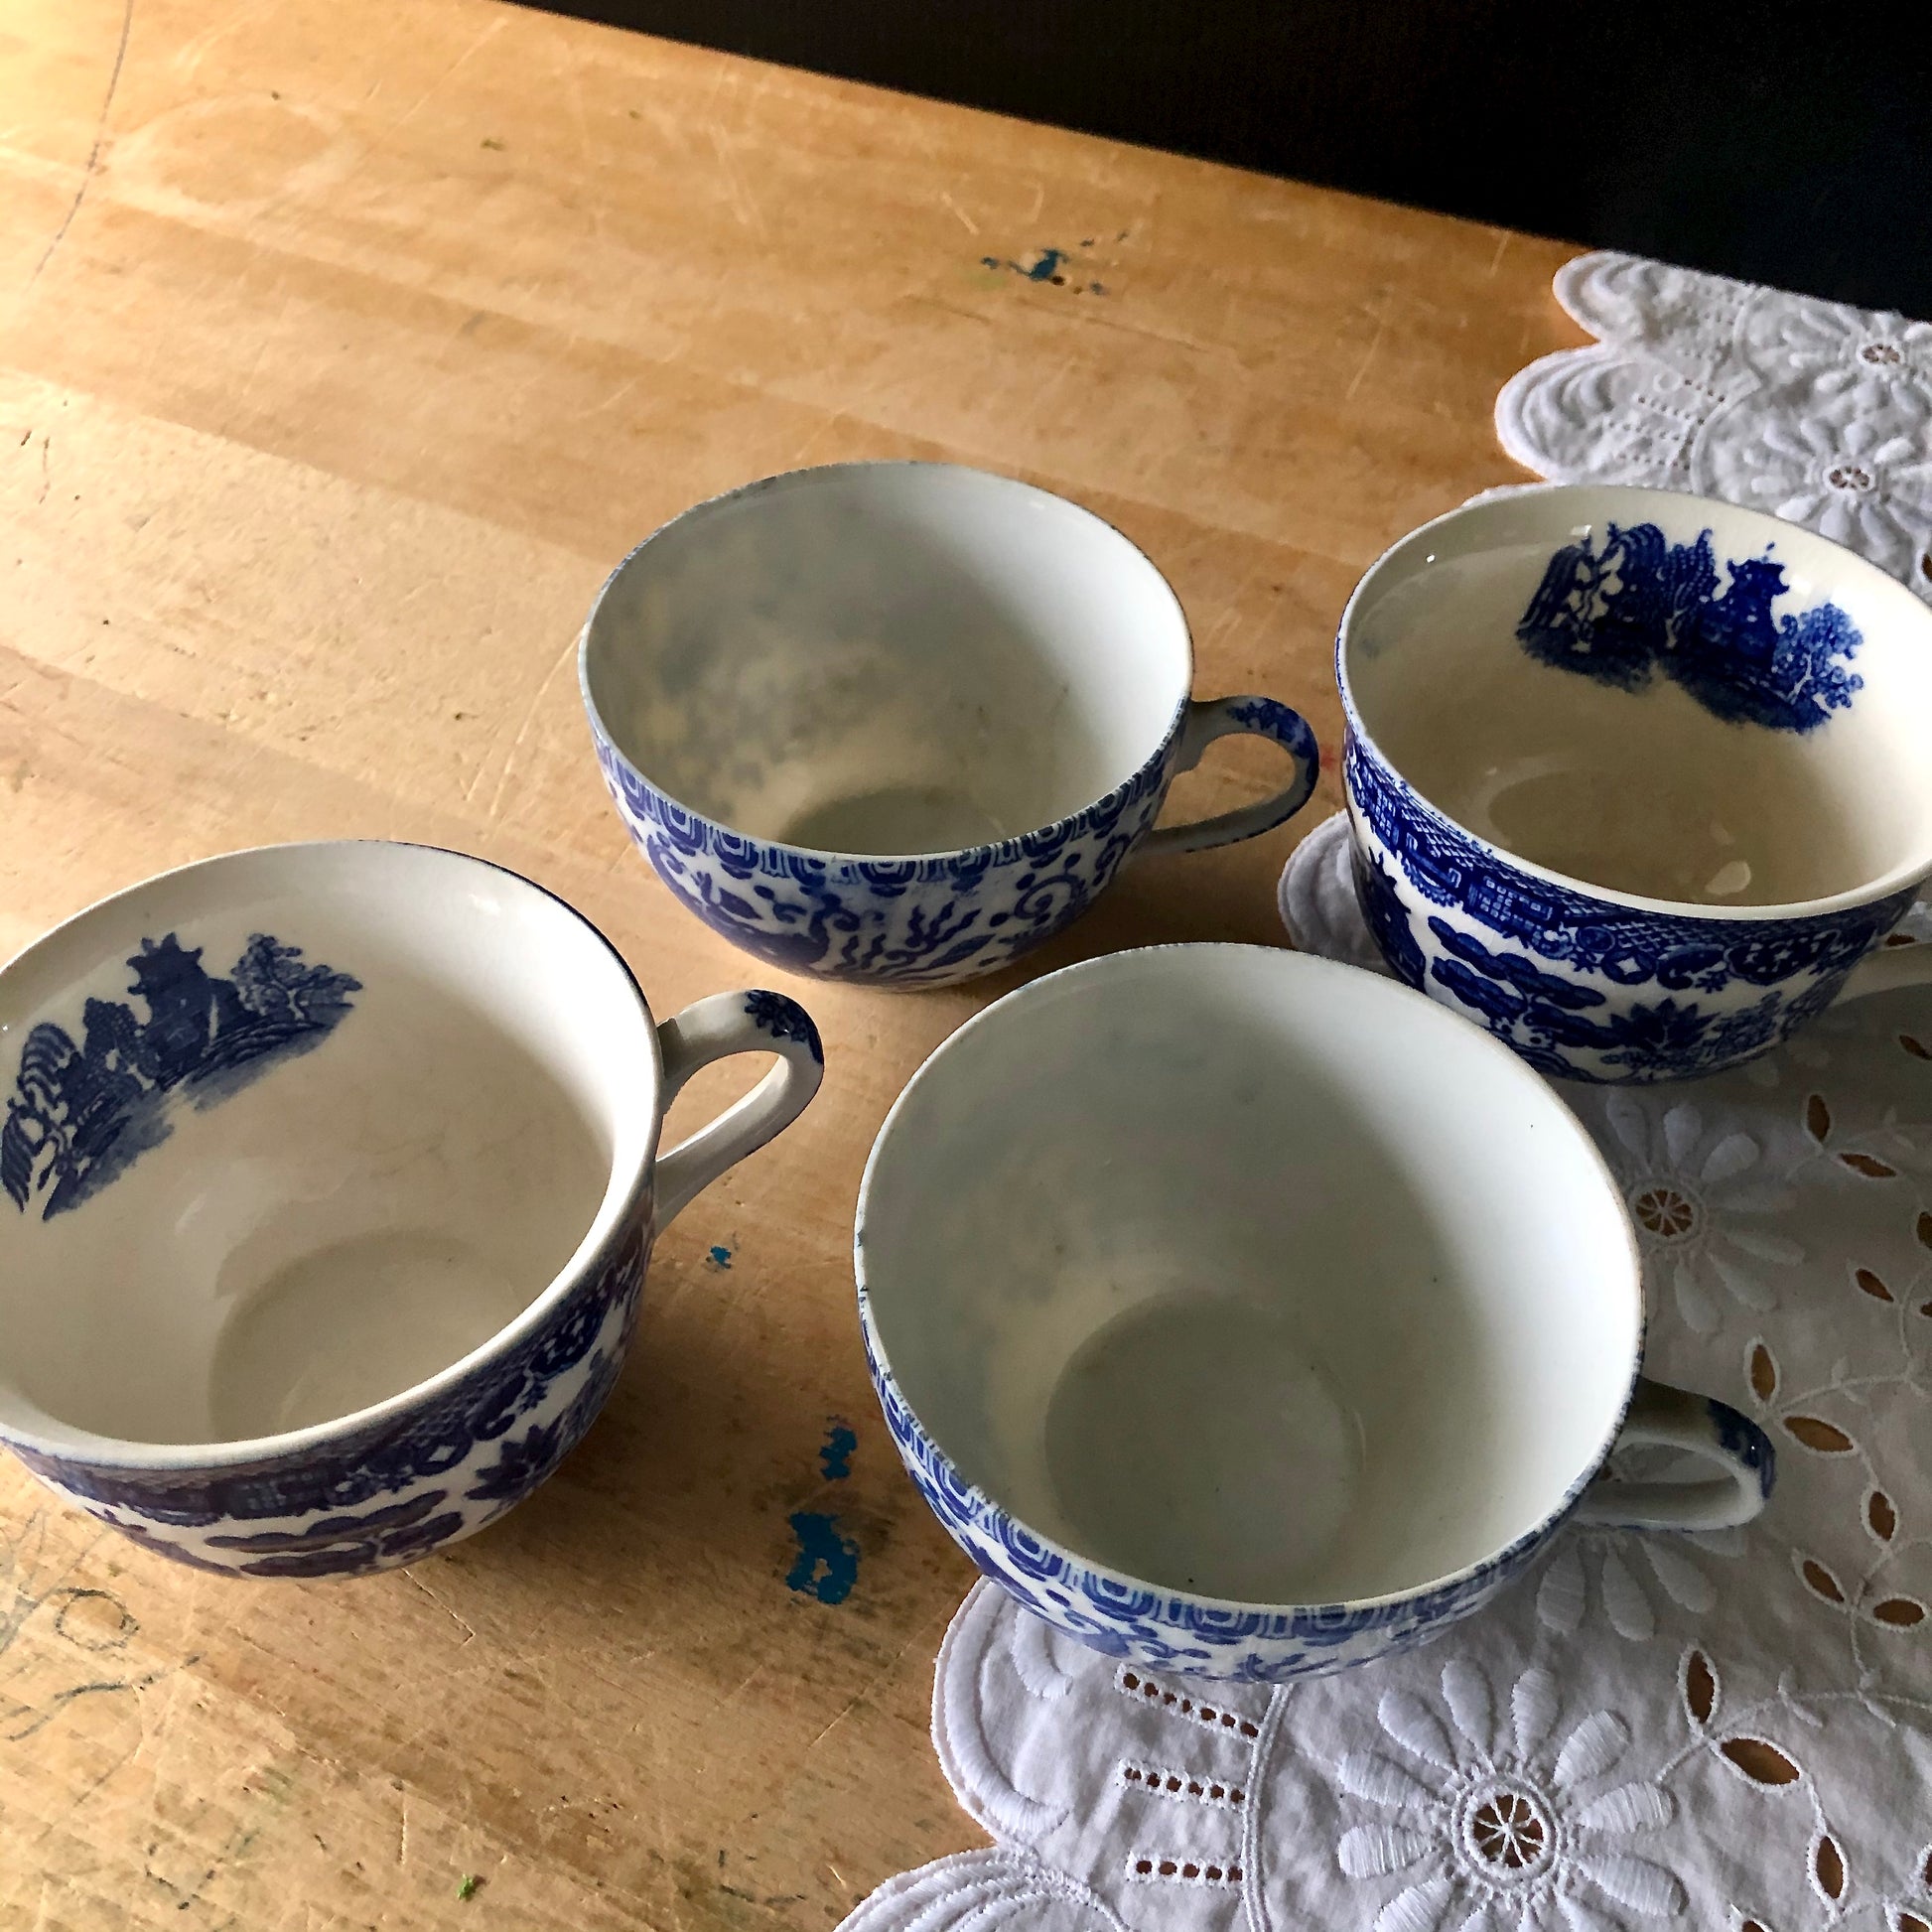 Mismatched Blue and White Tea Cups and Saucers